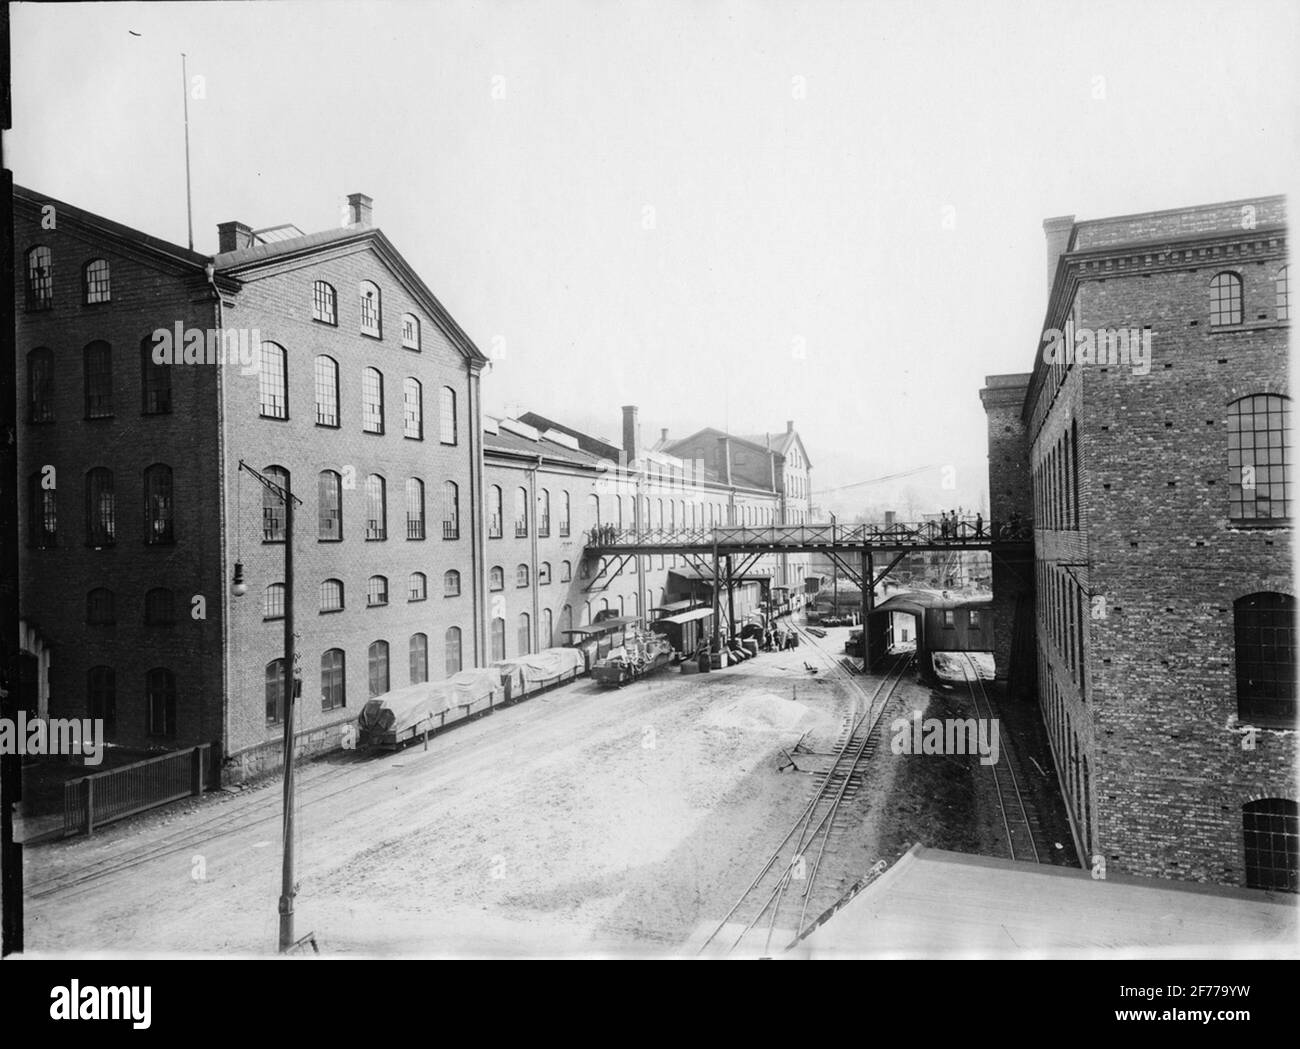 Husqvarna Weapon Fabriks AB before 1911. The casting room on the left. Opposite the bicycle workshop. Stock Photo